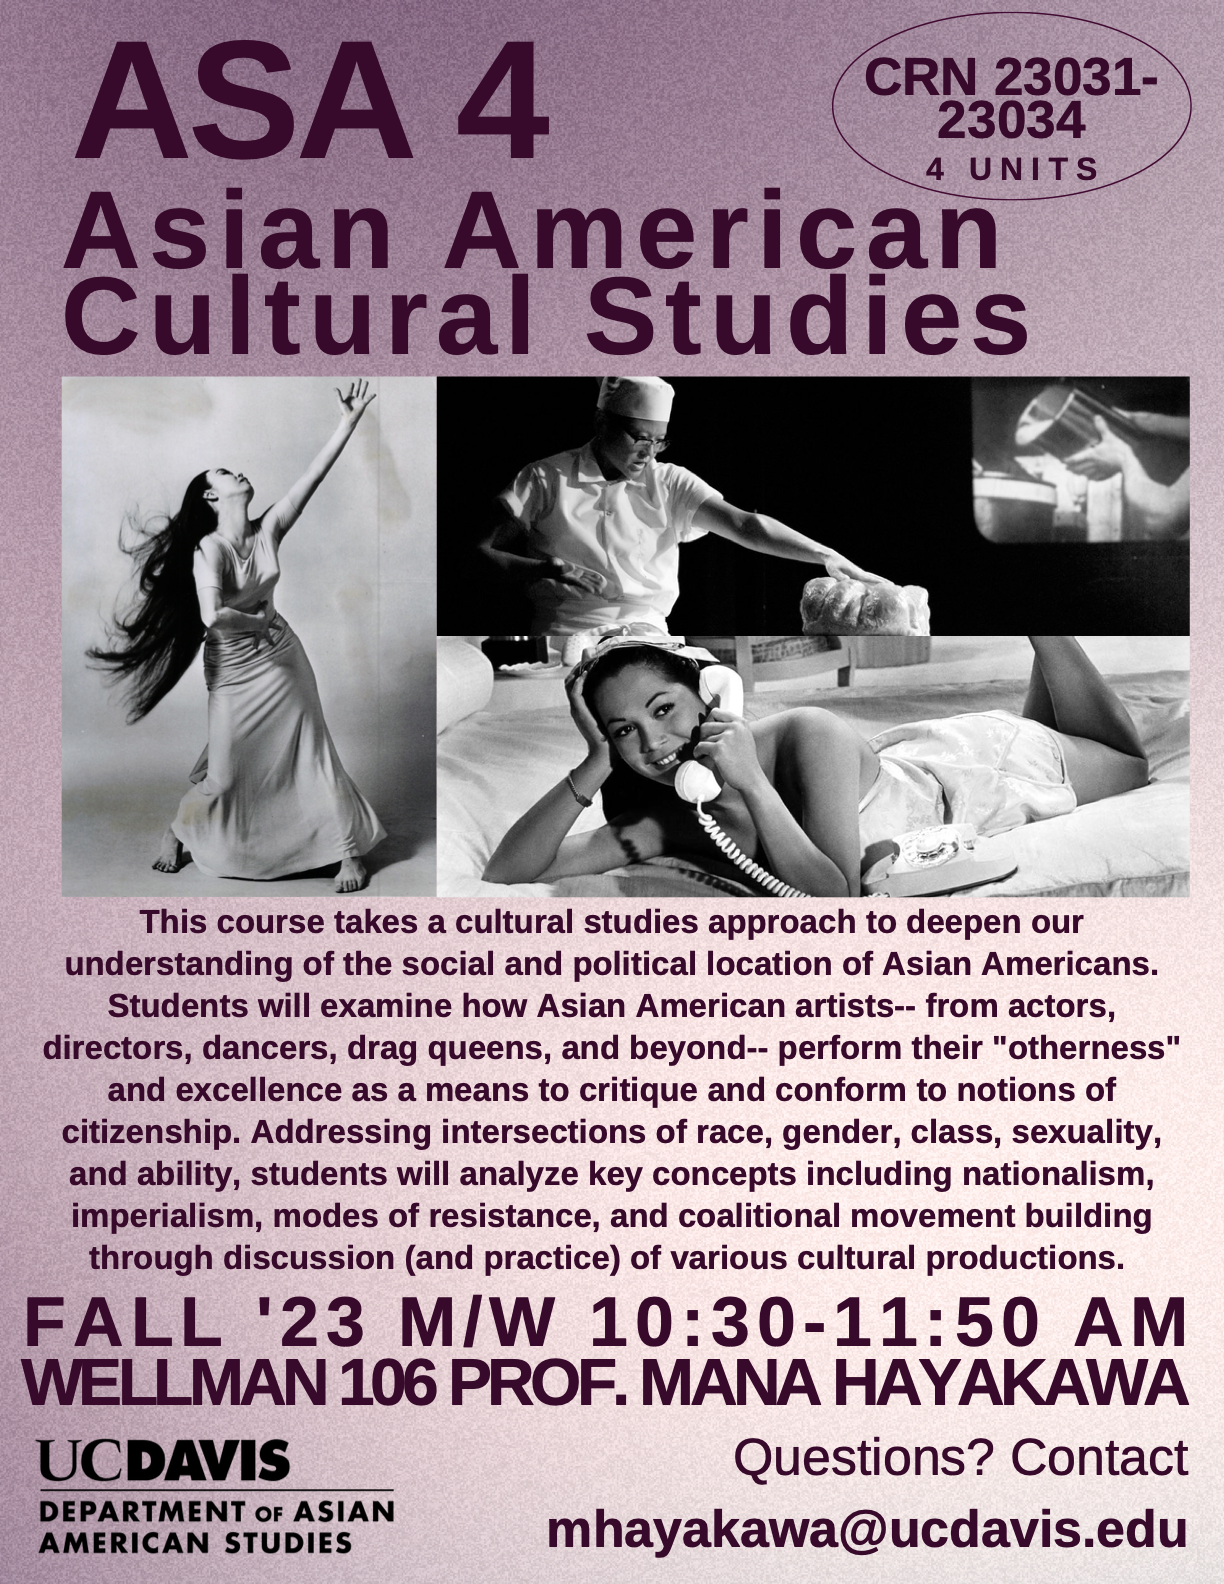 ASA 4 Asian American Cultural Studies course flyer for Fall 2023